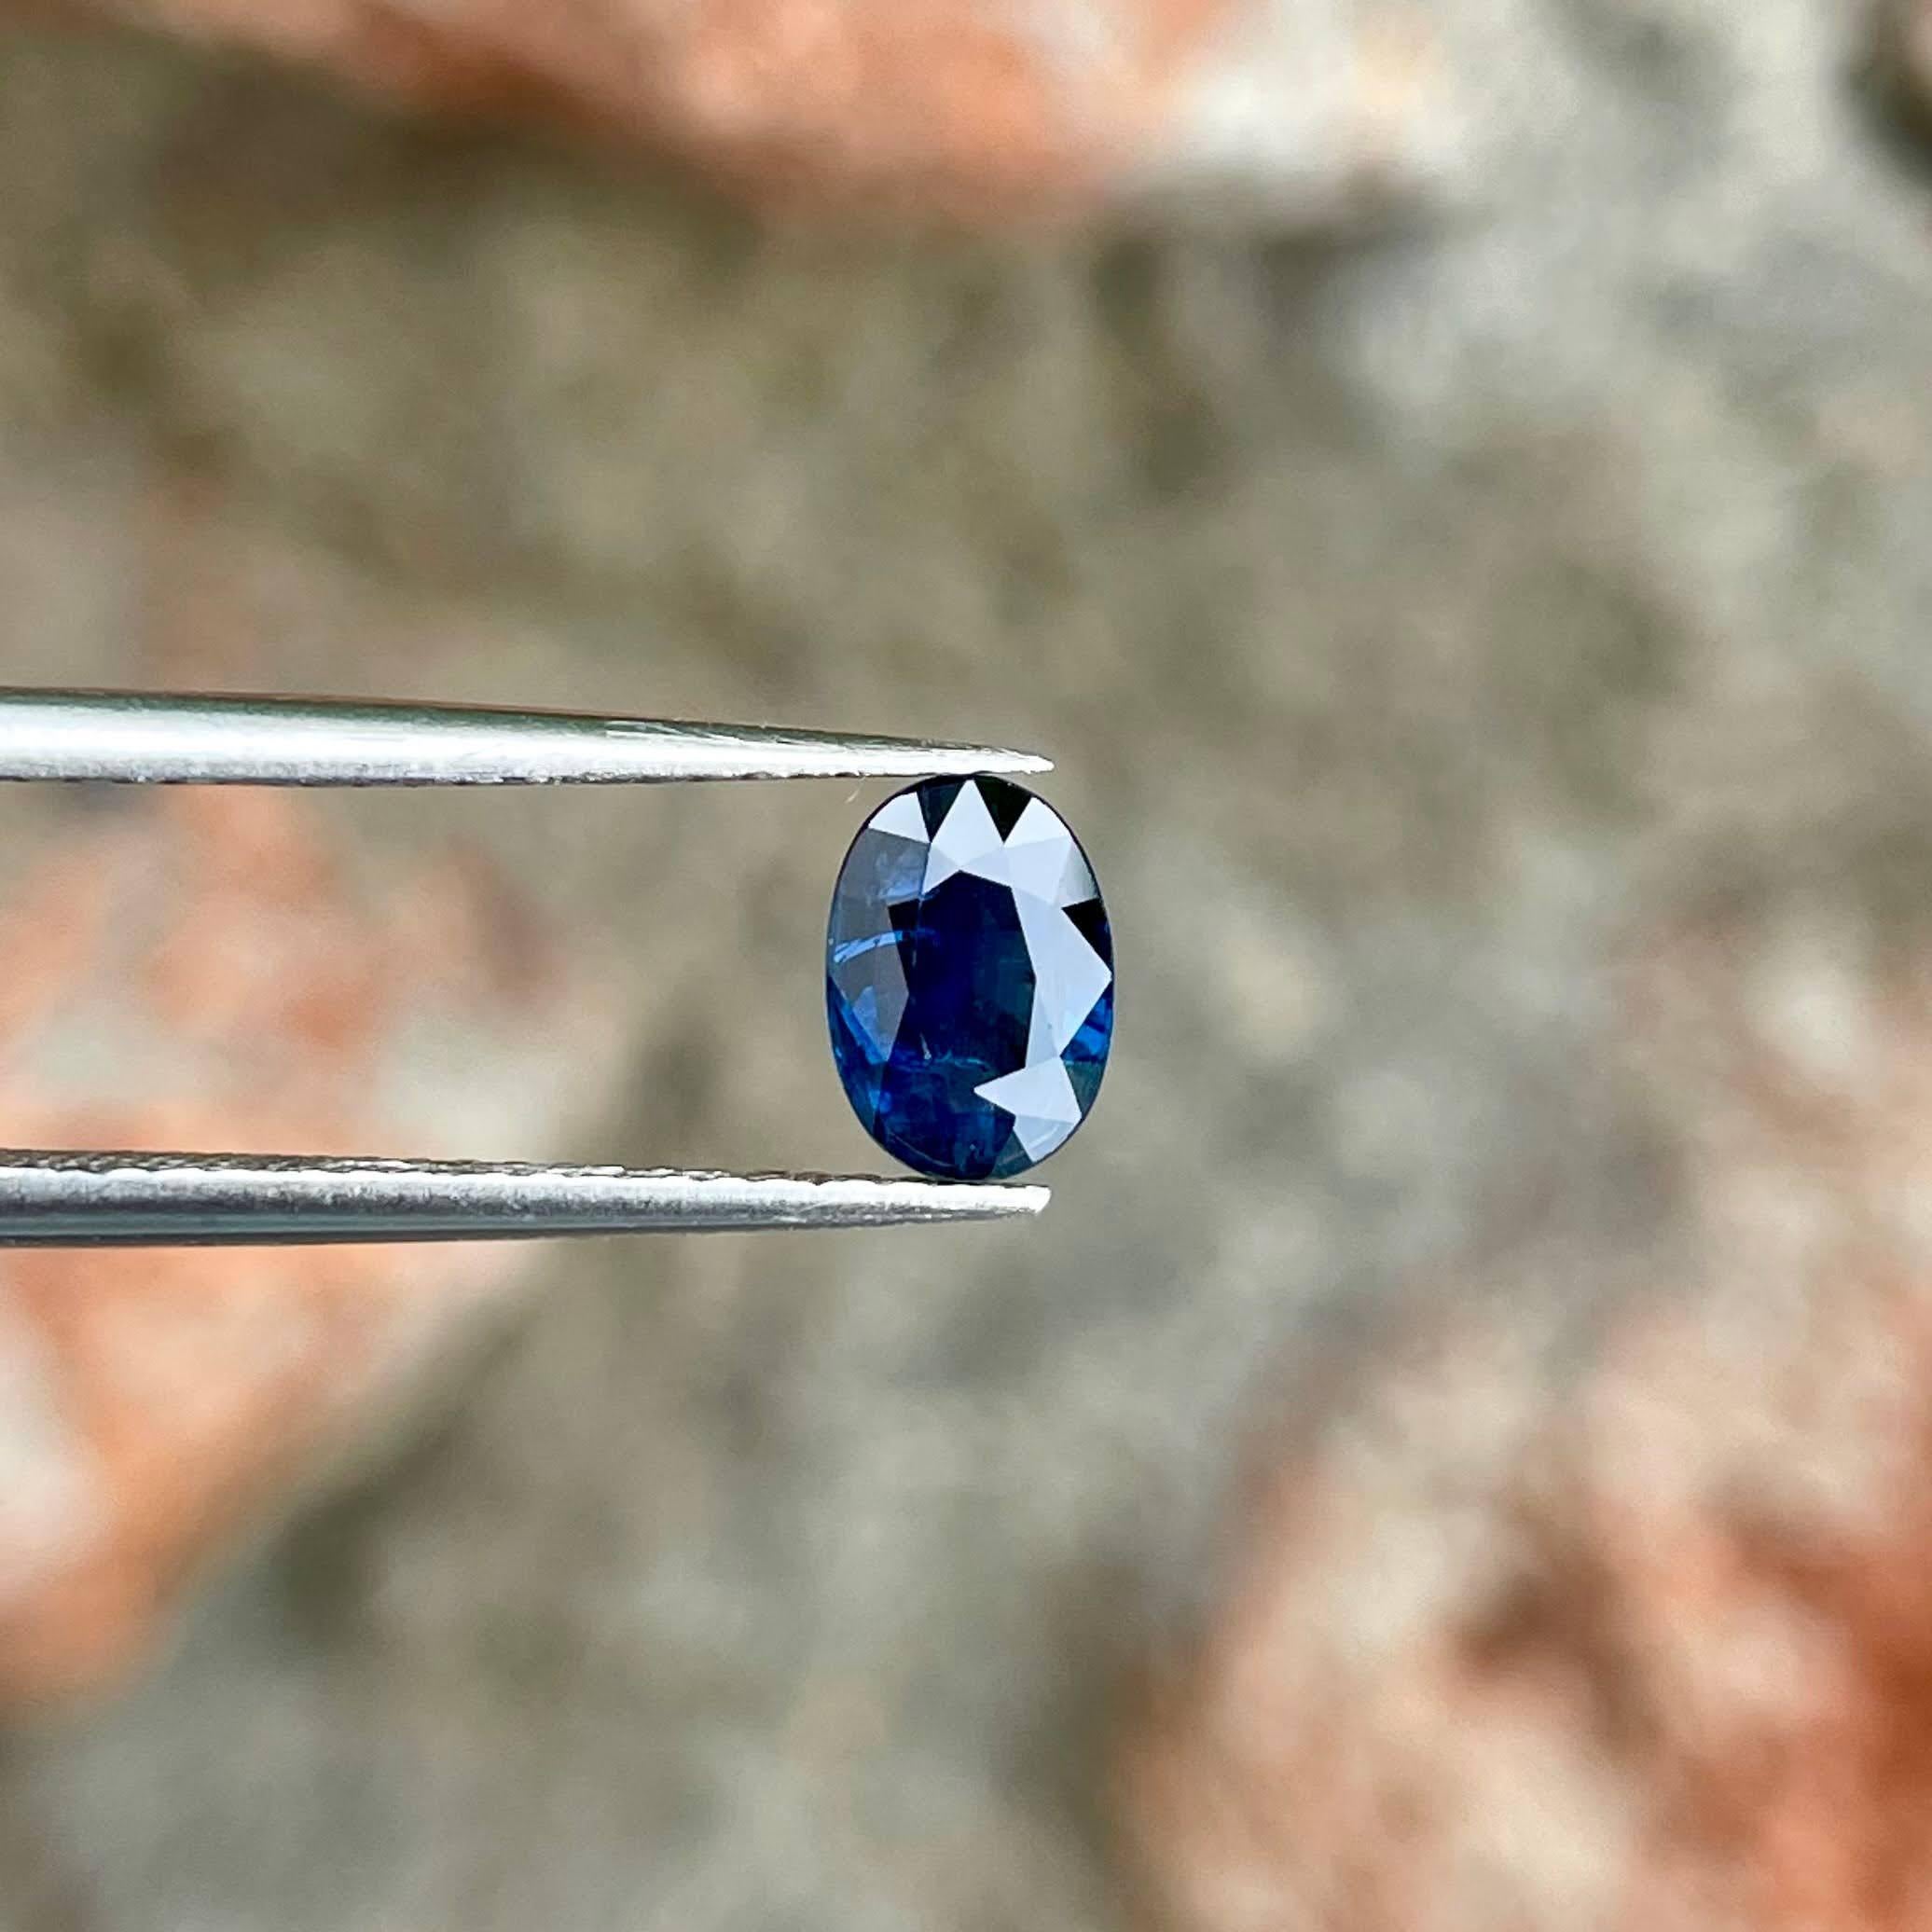 Weight 0.85 carats 
Dimensions 6.87x4.82x2.70 mm
Treatment Heated 
Clarity VVS
Origin Madagascar 
Shape oval 
Cut oval 



This exquisite 0.85 carat deep blue sapphire stone boasts an elegant oval cut, showcasing the brilliance of Madagascar's